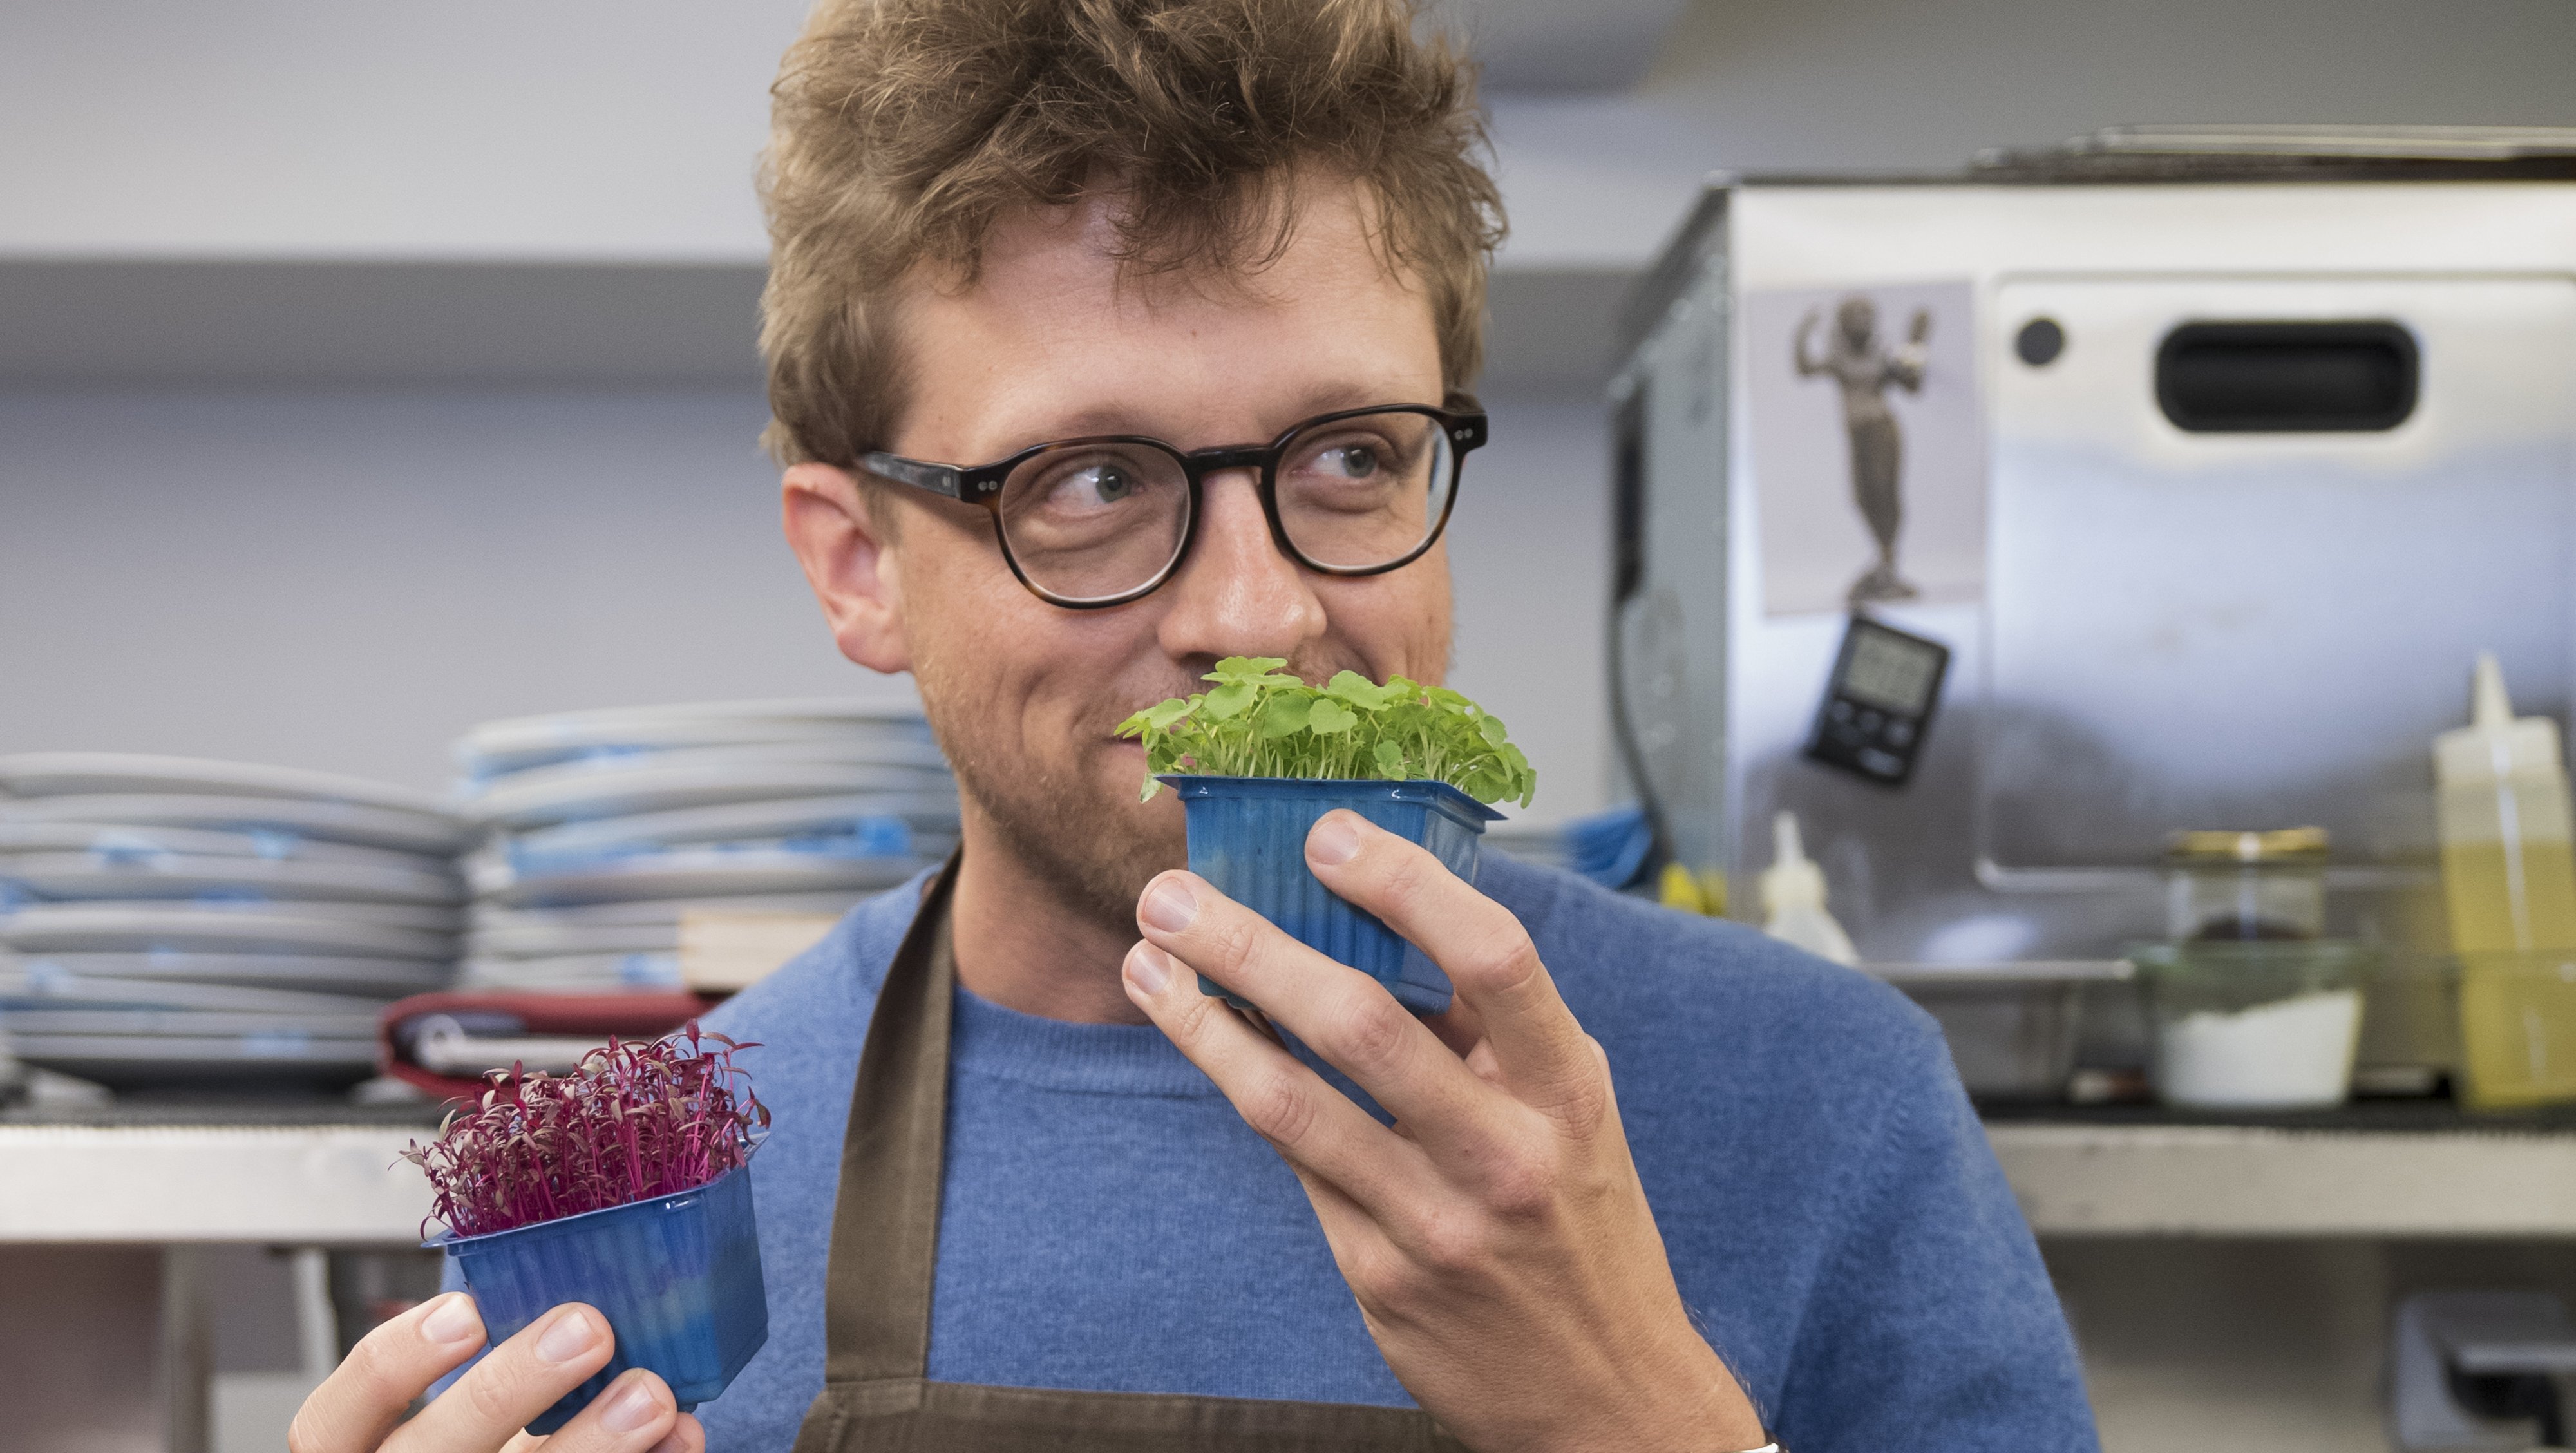 Martin von der Nahmer is standing in a kitchen while holding a green herb plant to his nose. In his other hand, he is holding a red coloured plant.